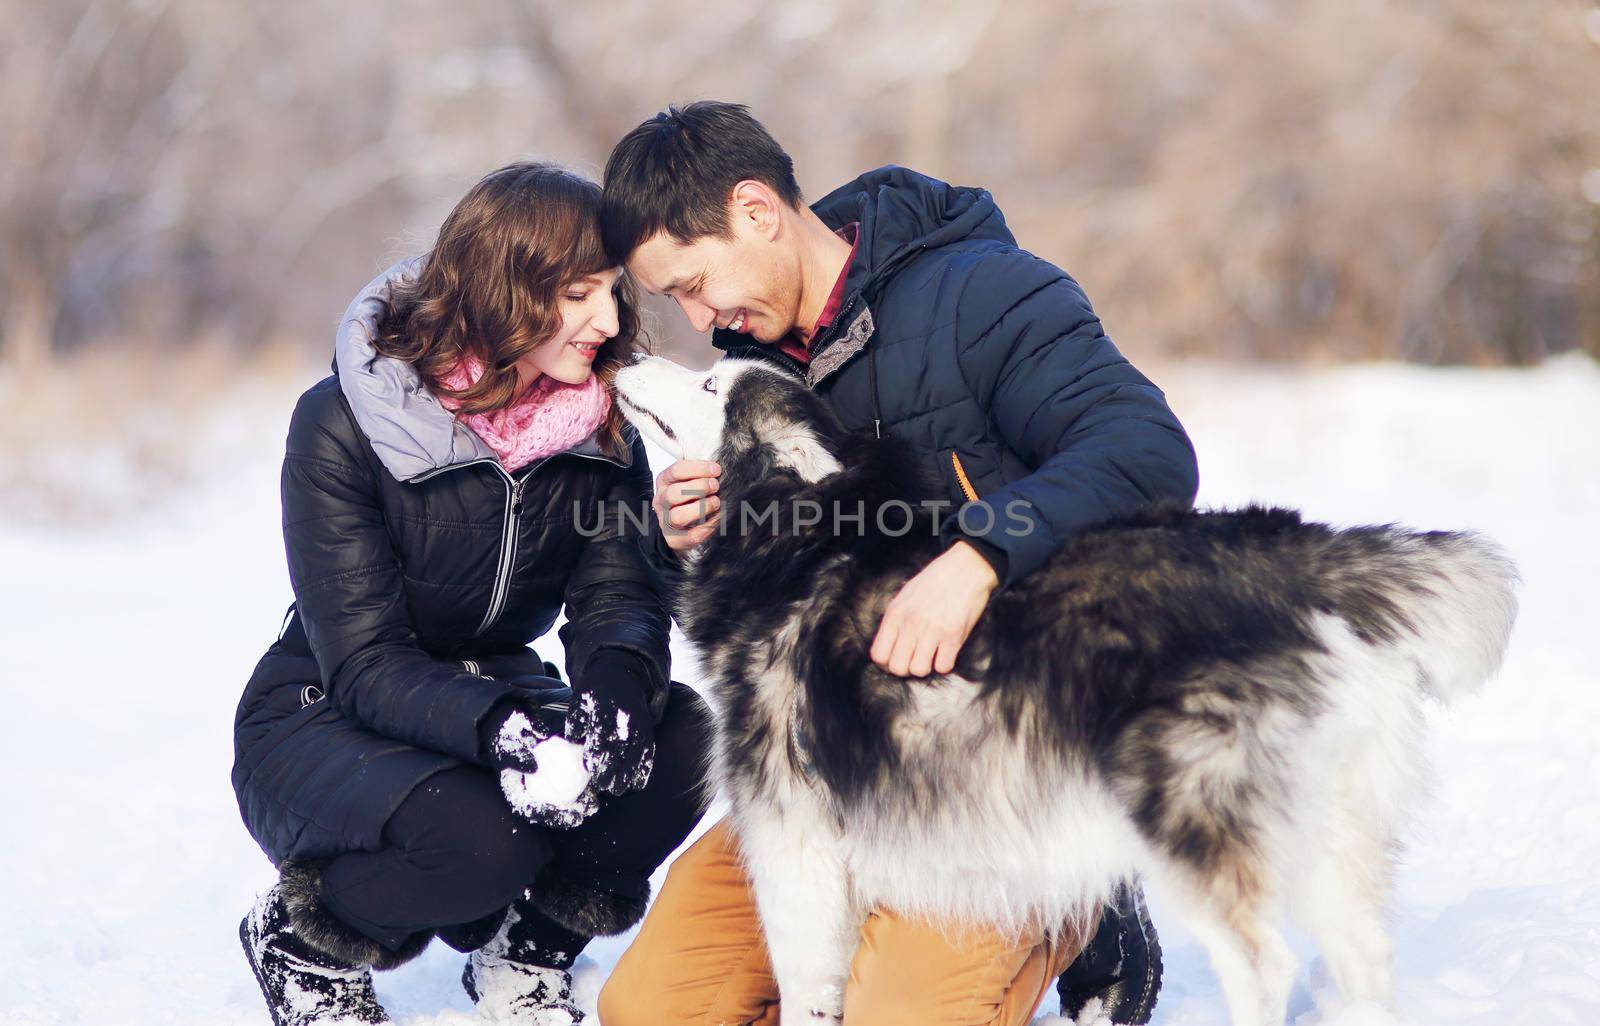 Attractive couple smiling and having fun in winter park with their siberian husky dog.